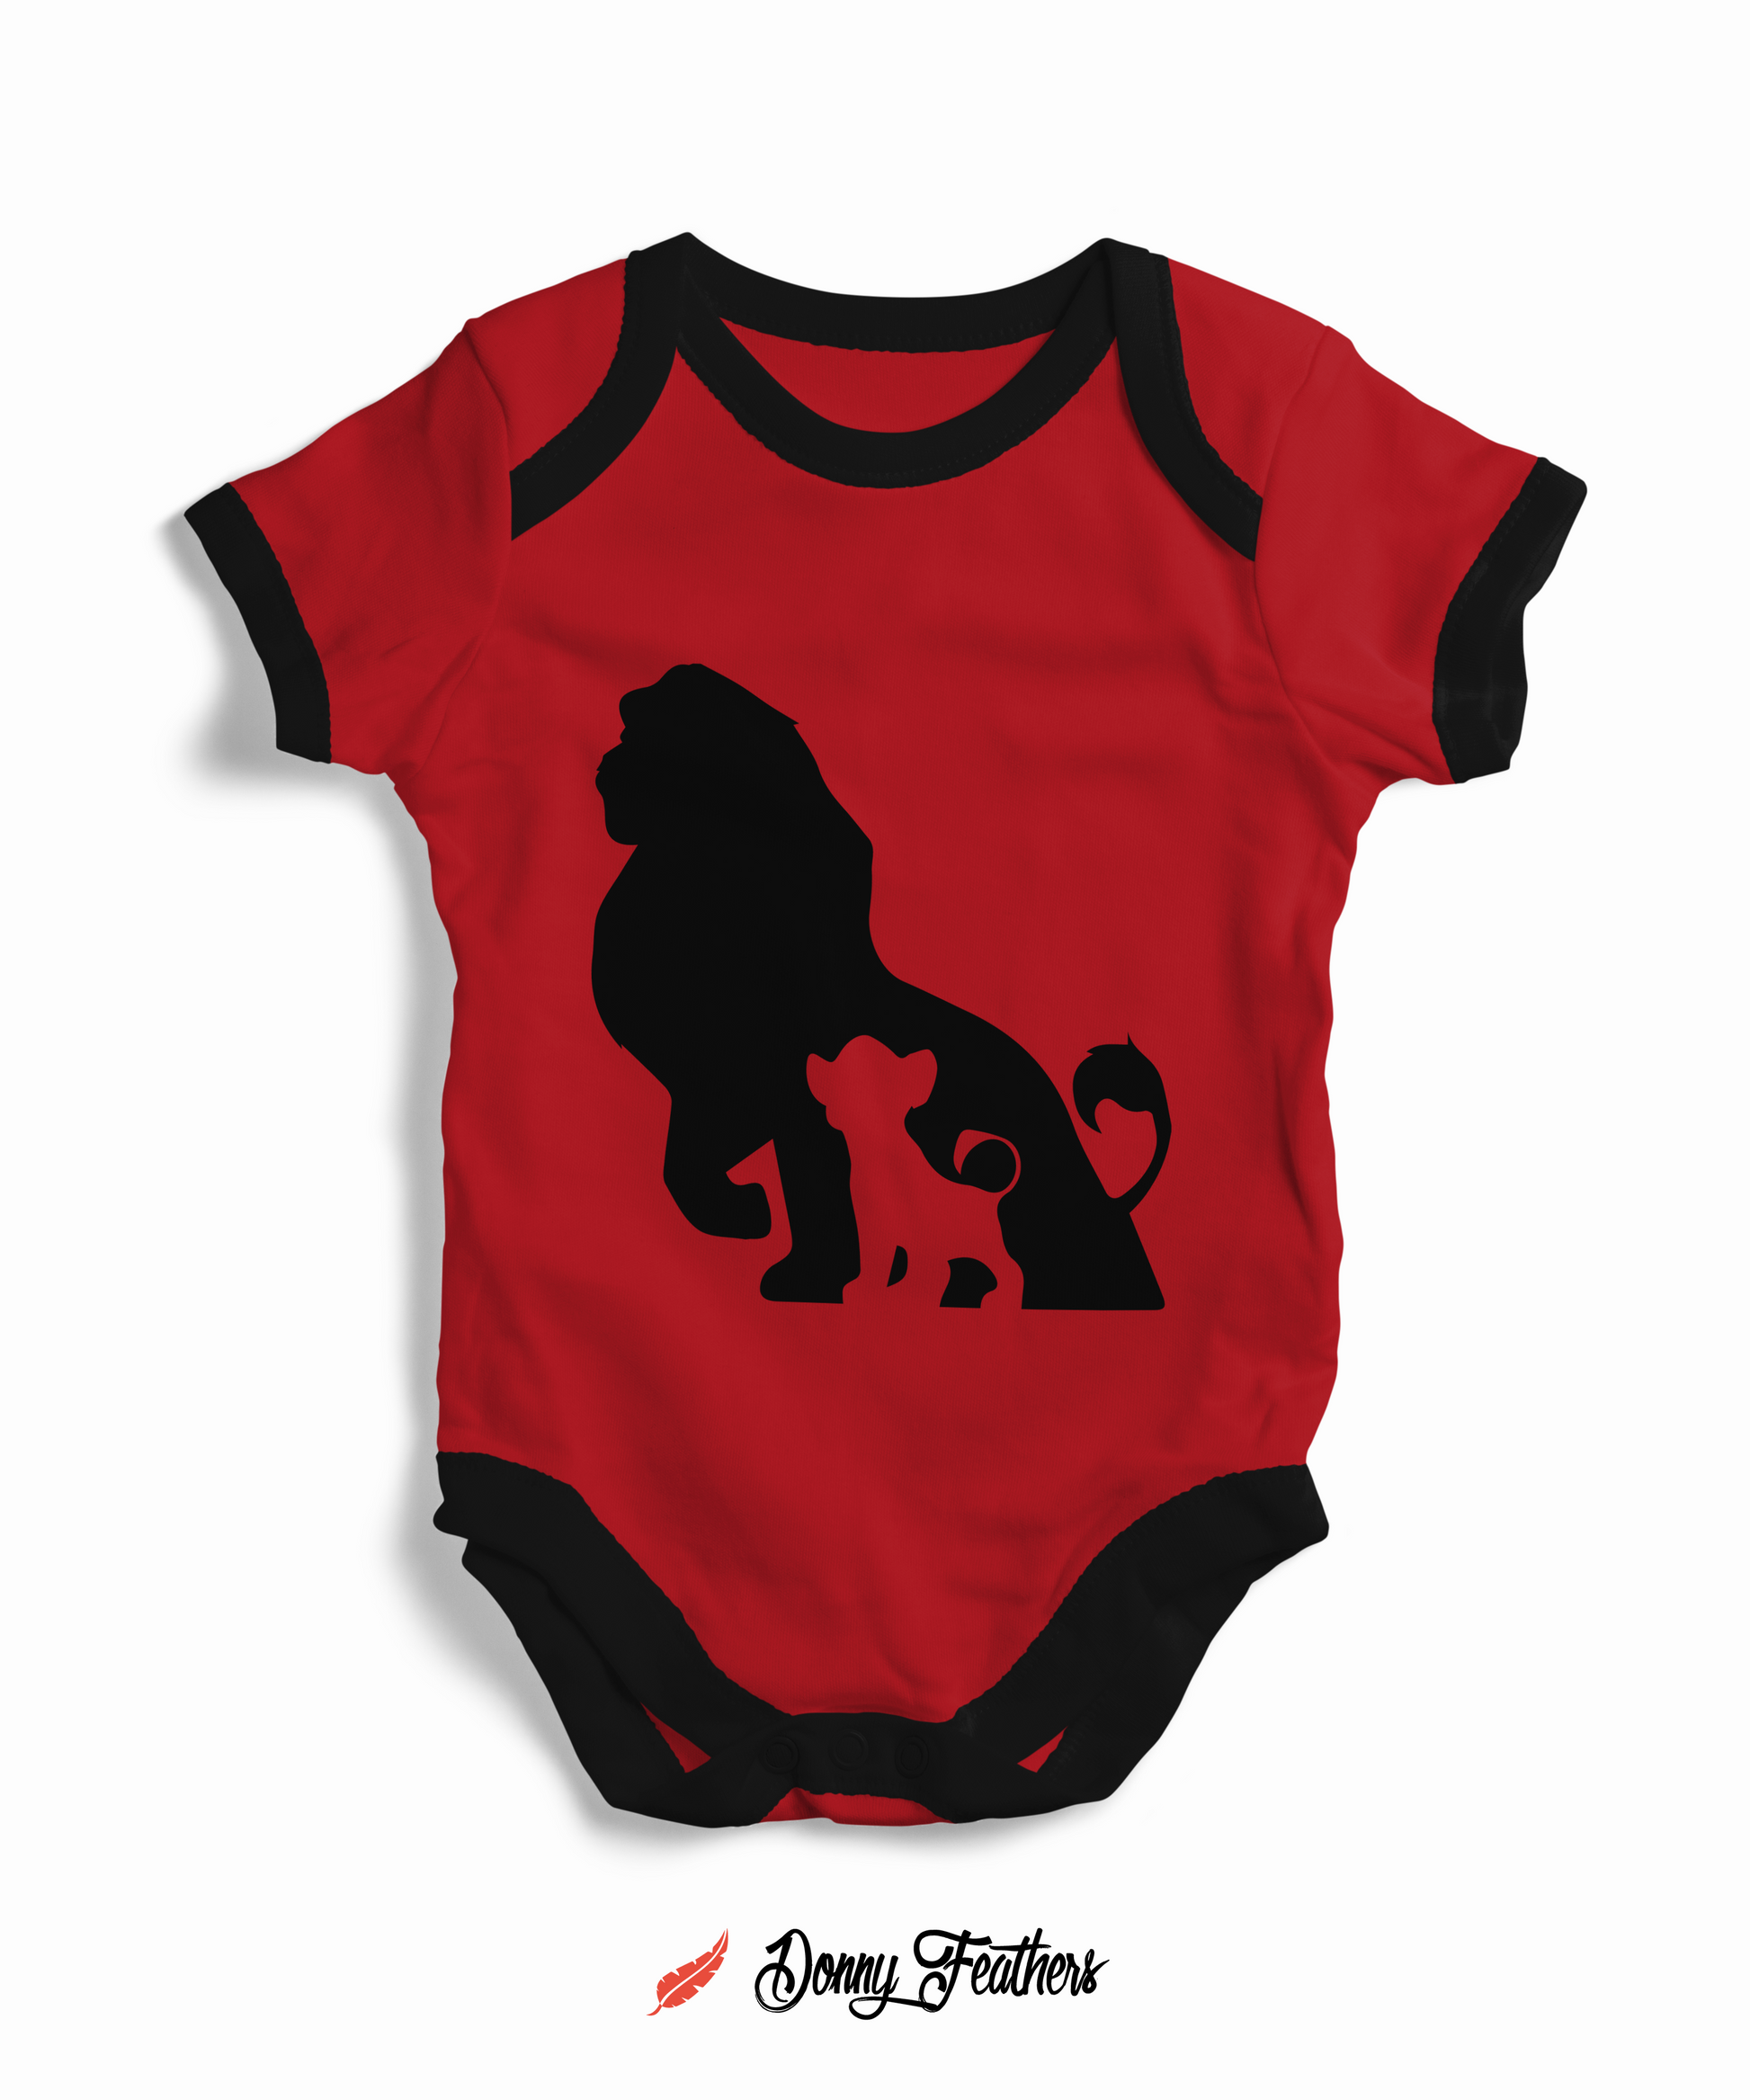 Lion King Baby Bodysuits | Simba The Lion King Romper (Red) By: Donny Feathers